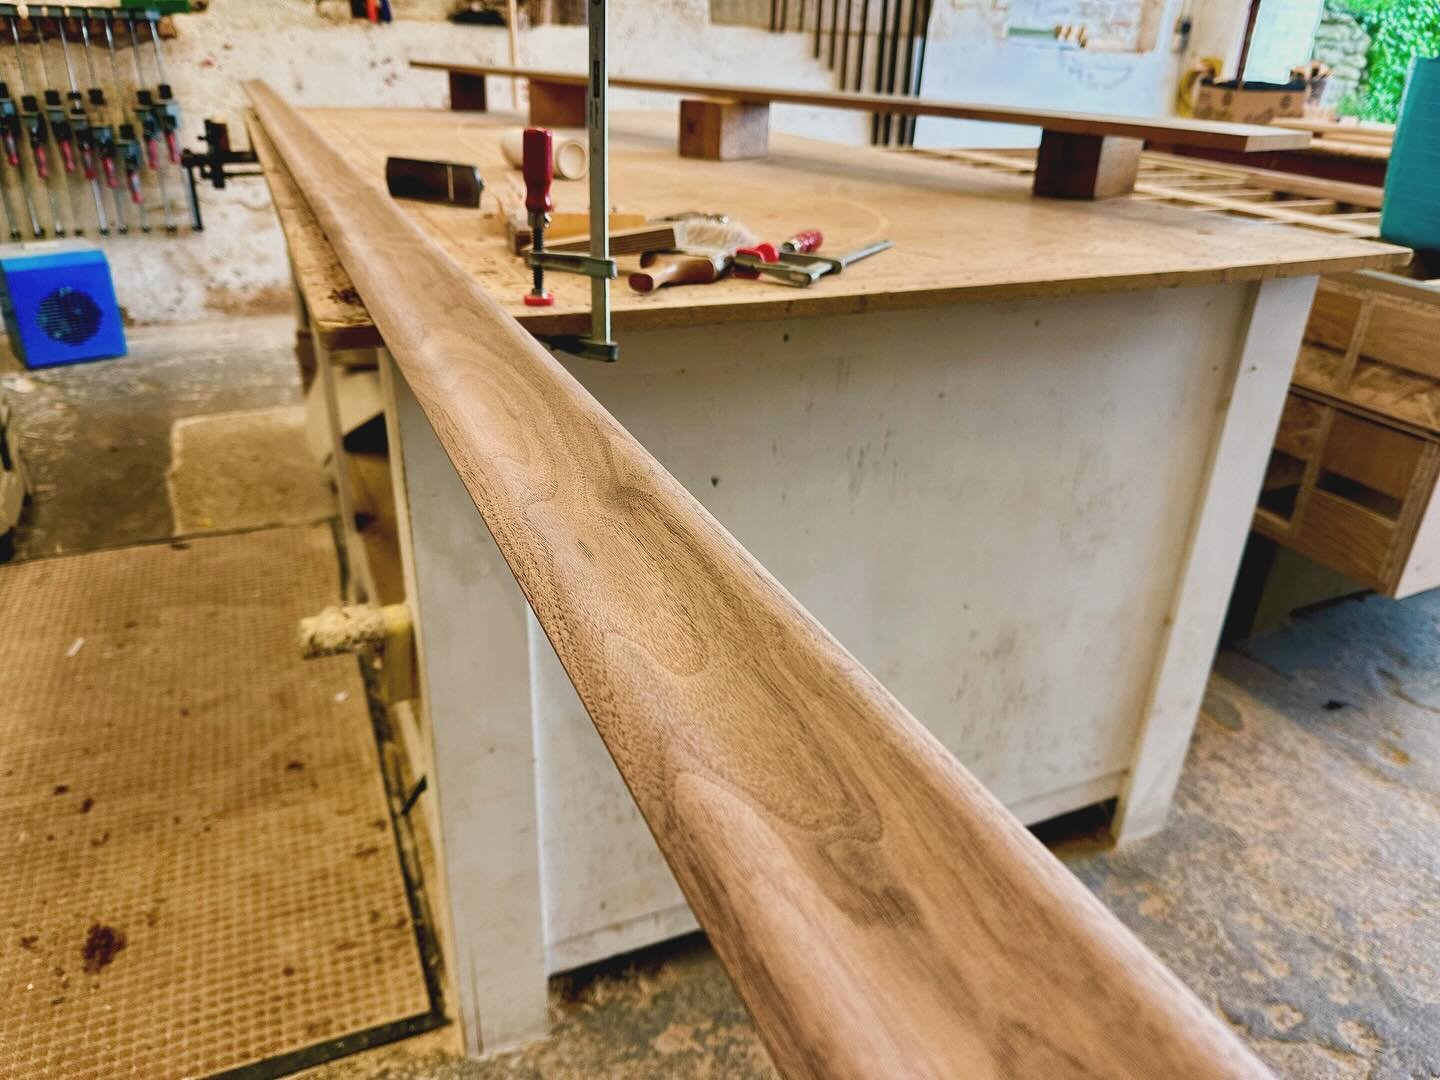 Finishing off this 4.5M solid walnut hand rail for an upcoming project. #walnut #pannelling #bespokeinteriors #bespokeinteriordesign